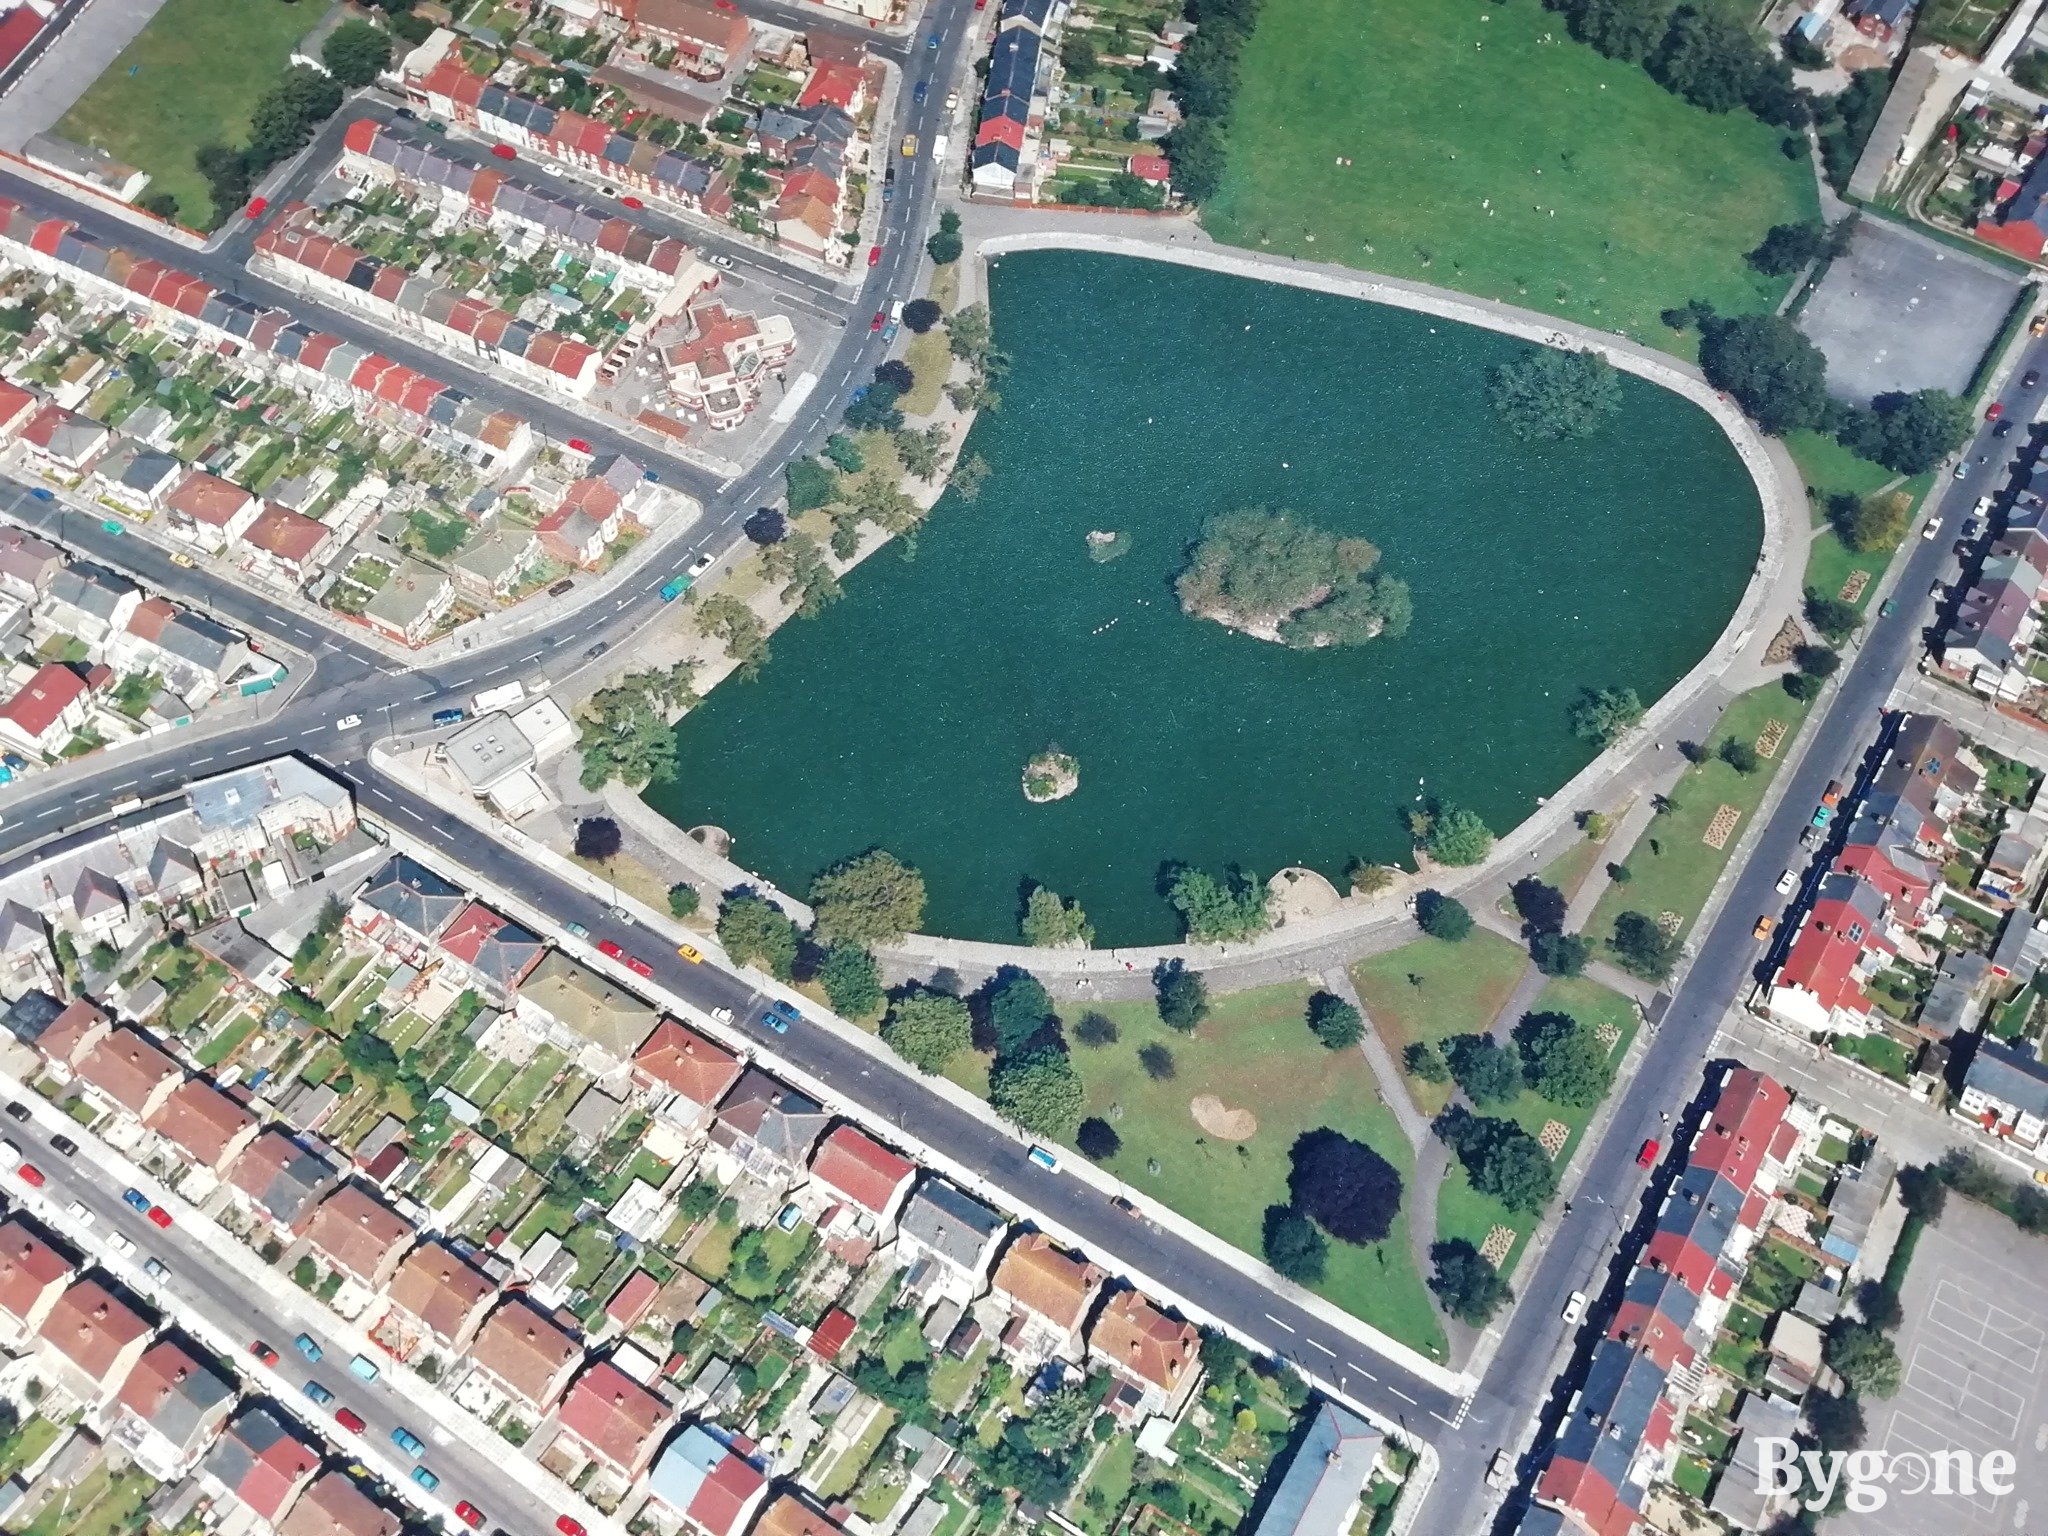 Aerial view of Baffins Pond, 1980s